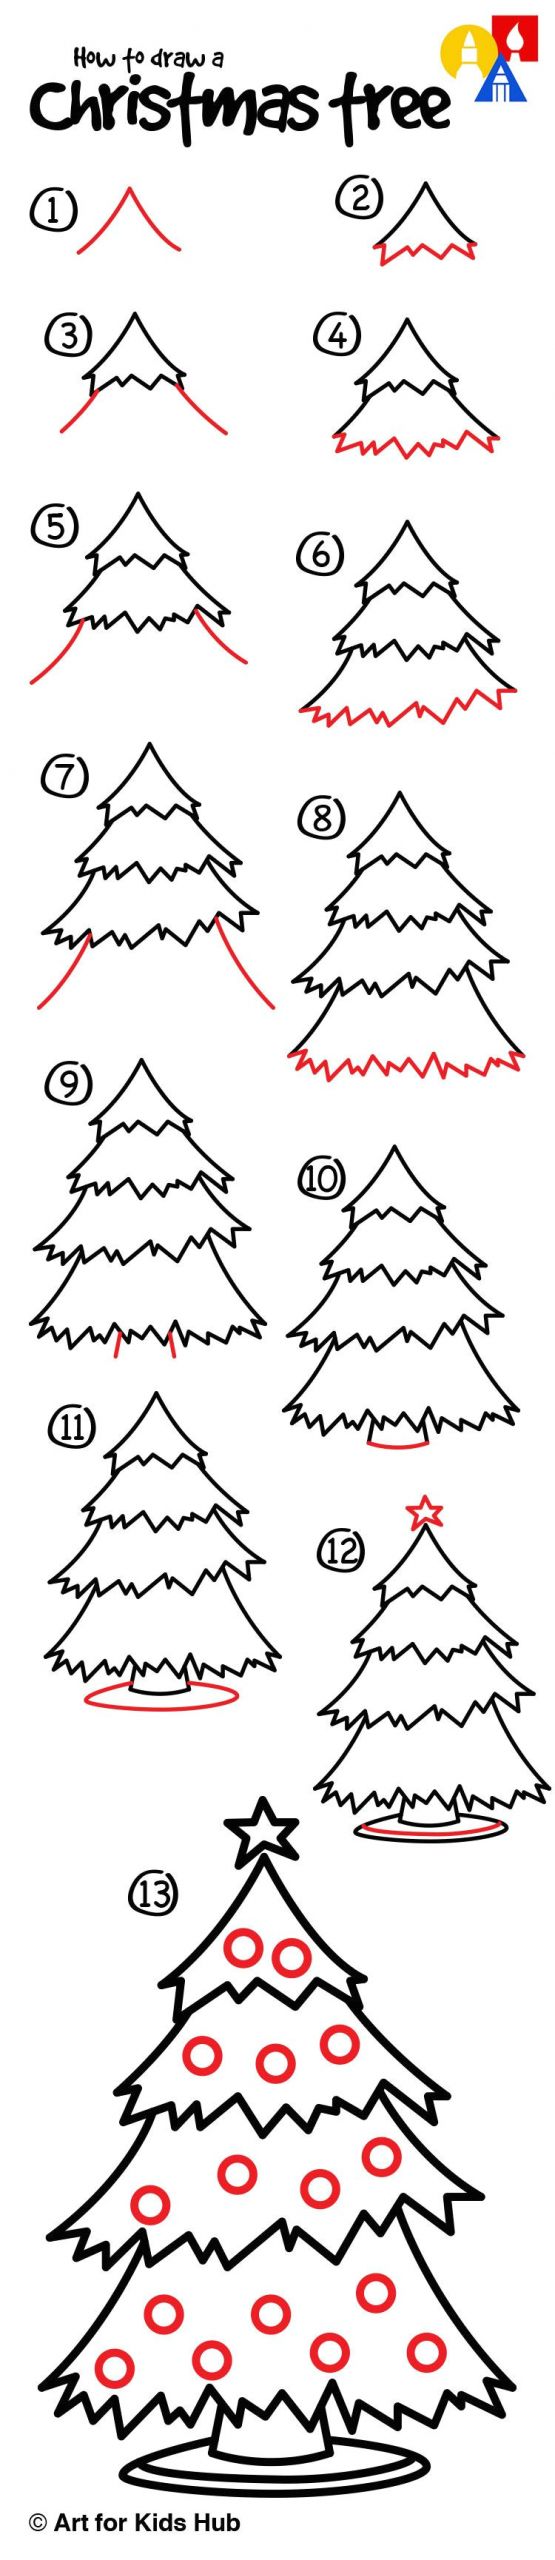 Easy Christmas Patterns to Draw How to Draw A Christmas Tree Art for Kids Hub Zeichnen